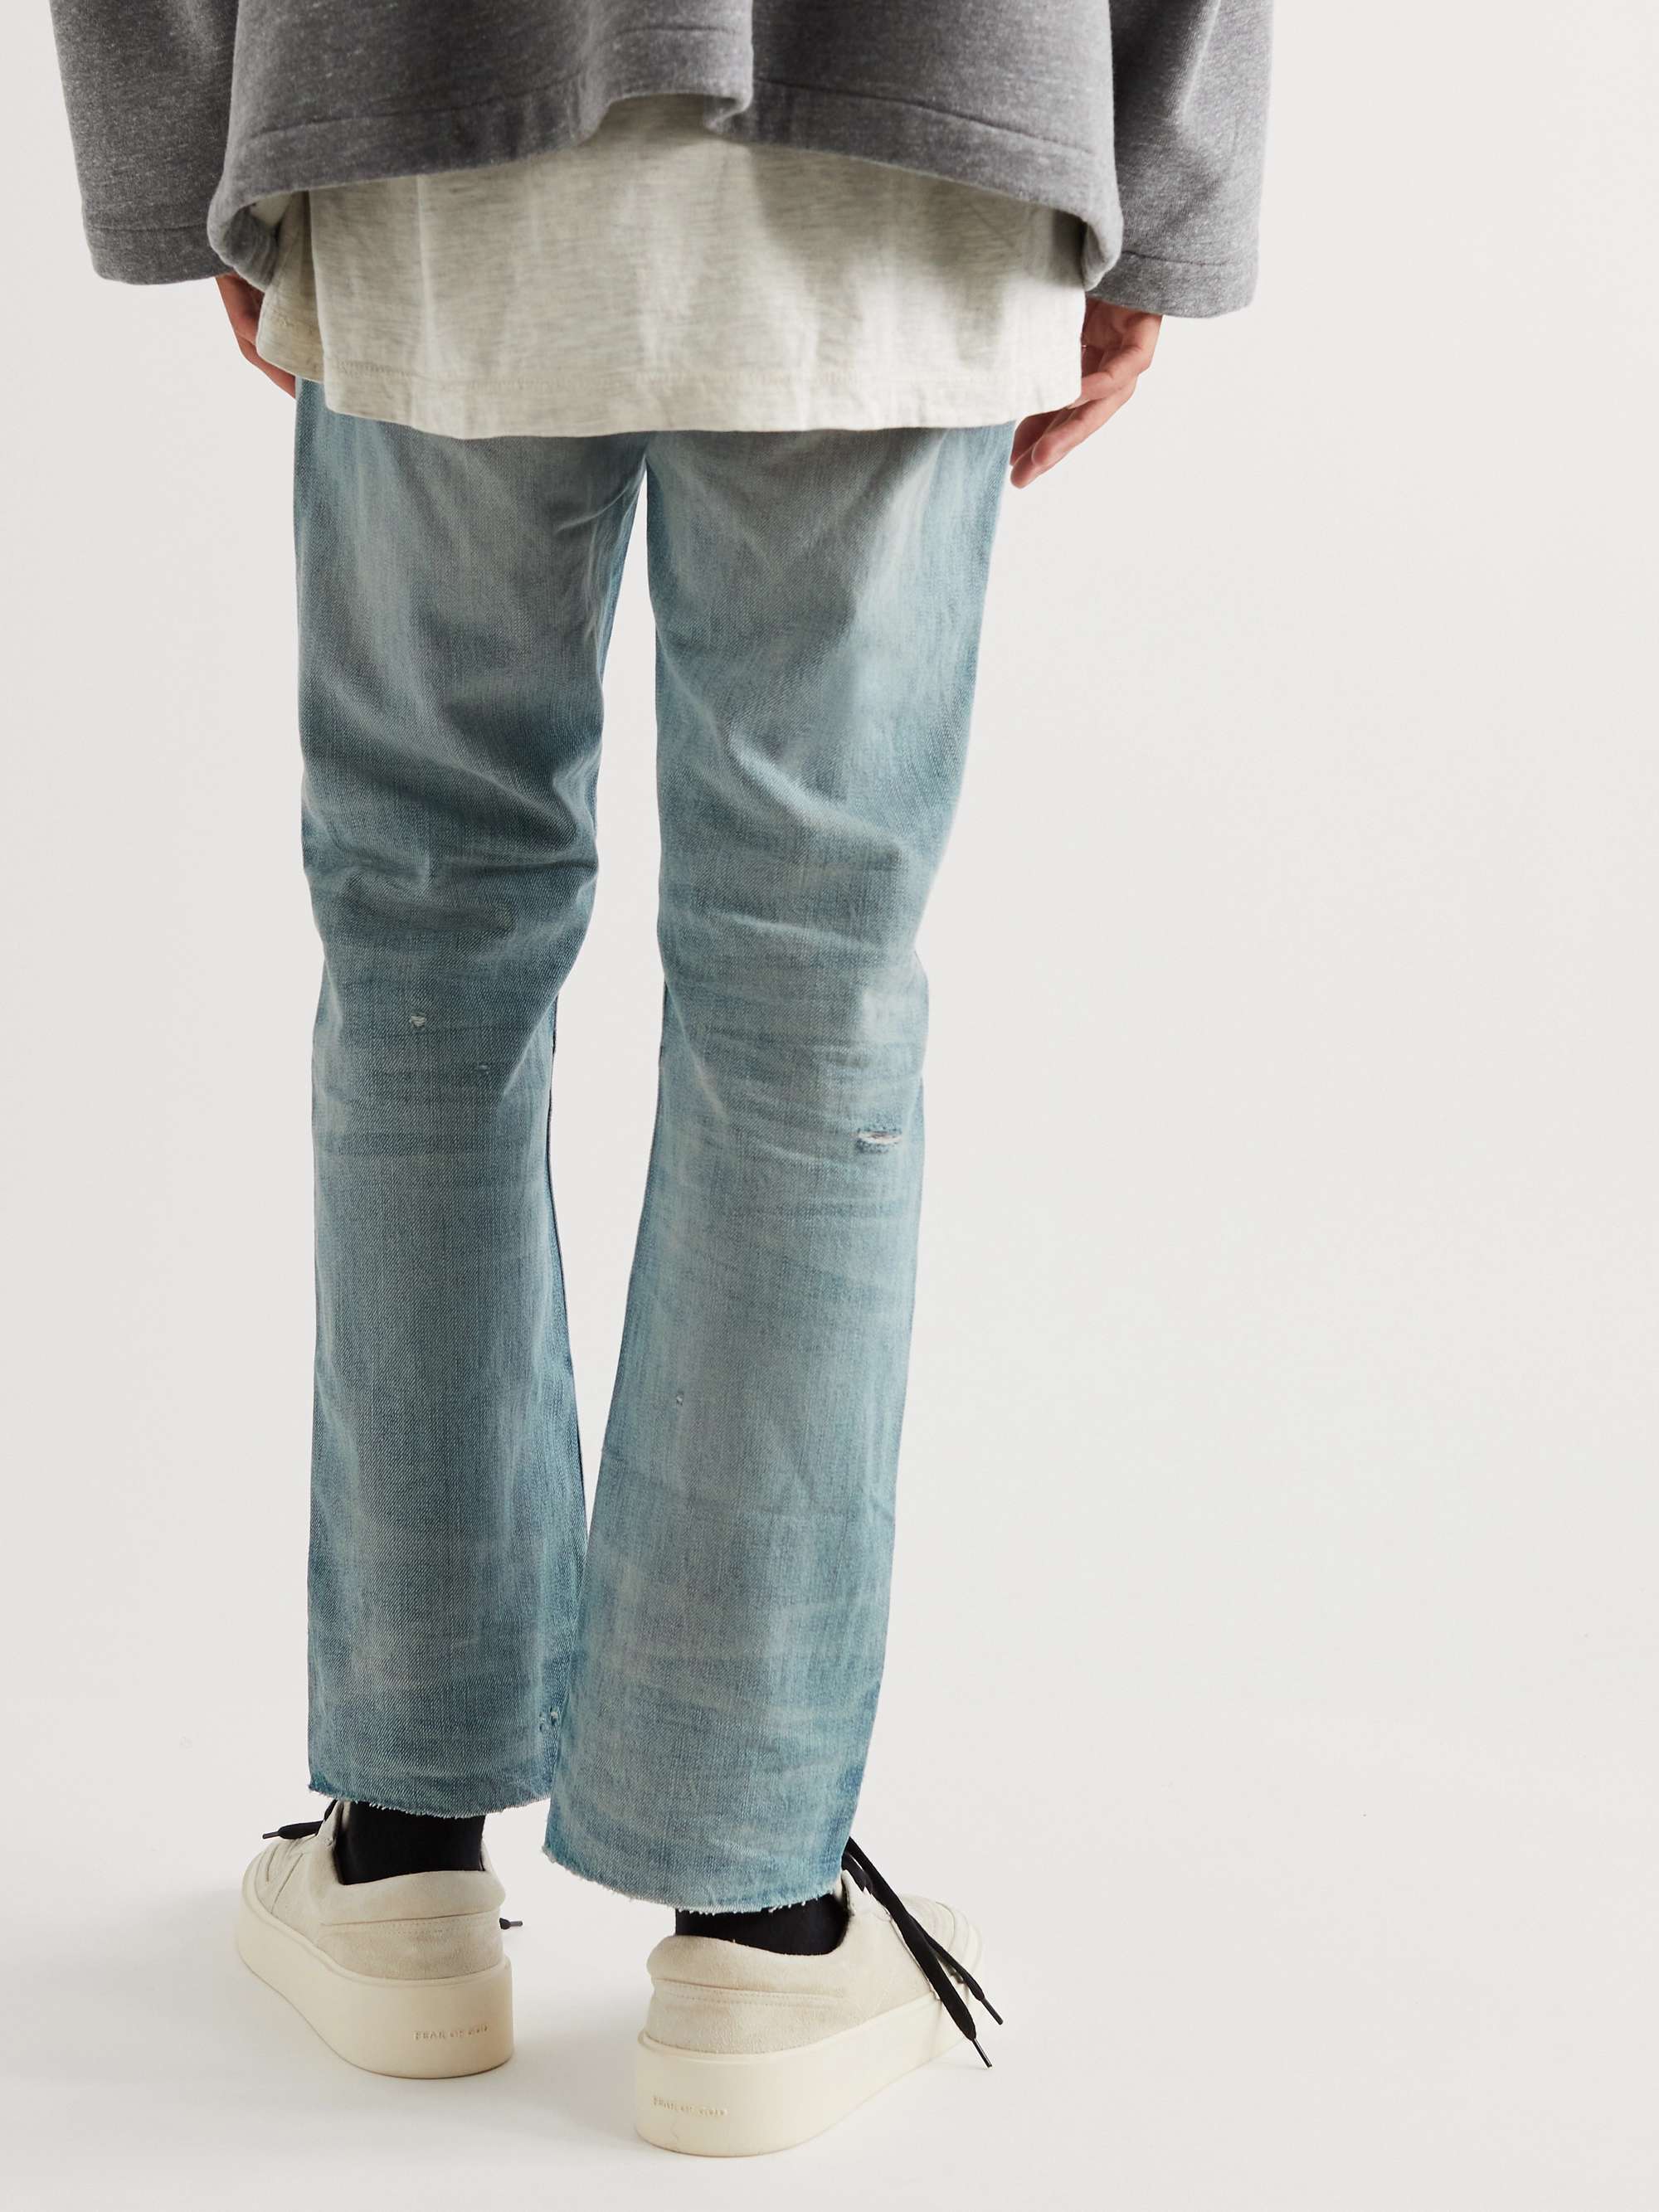 FEAR OF GOD Distressed Straight-Leg Jeans